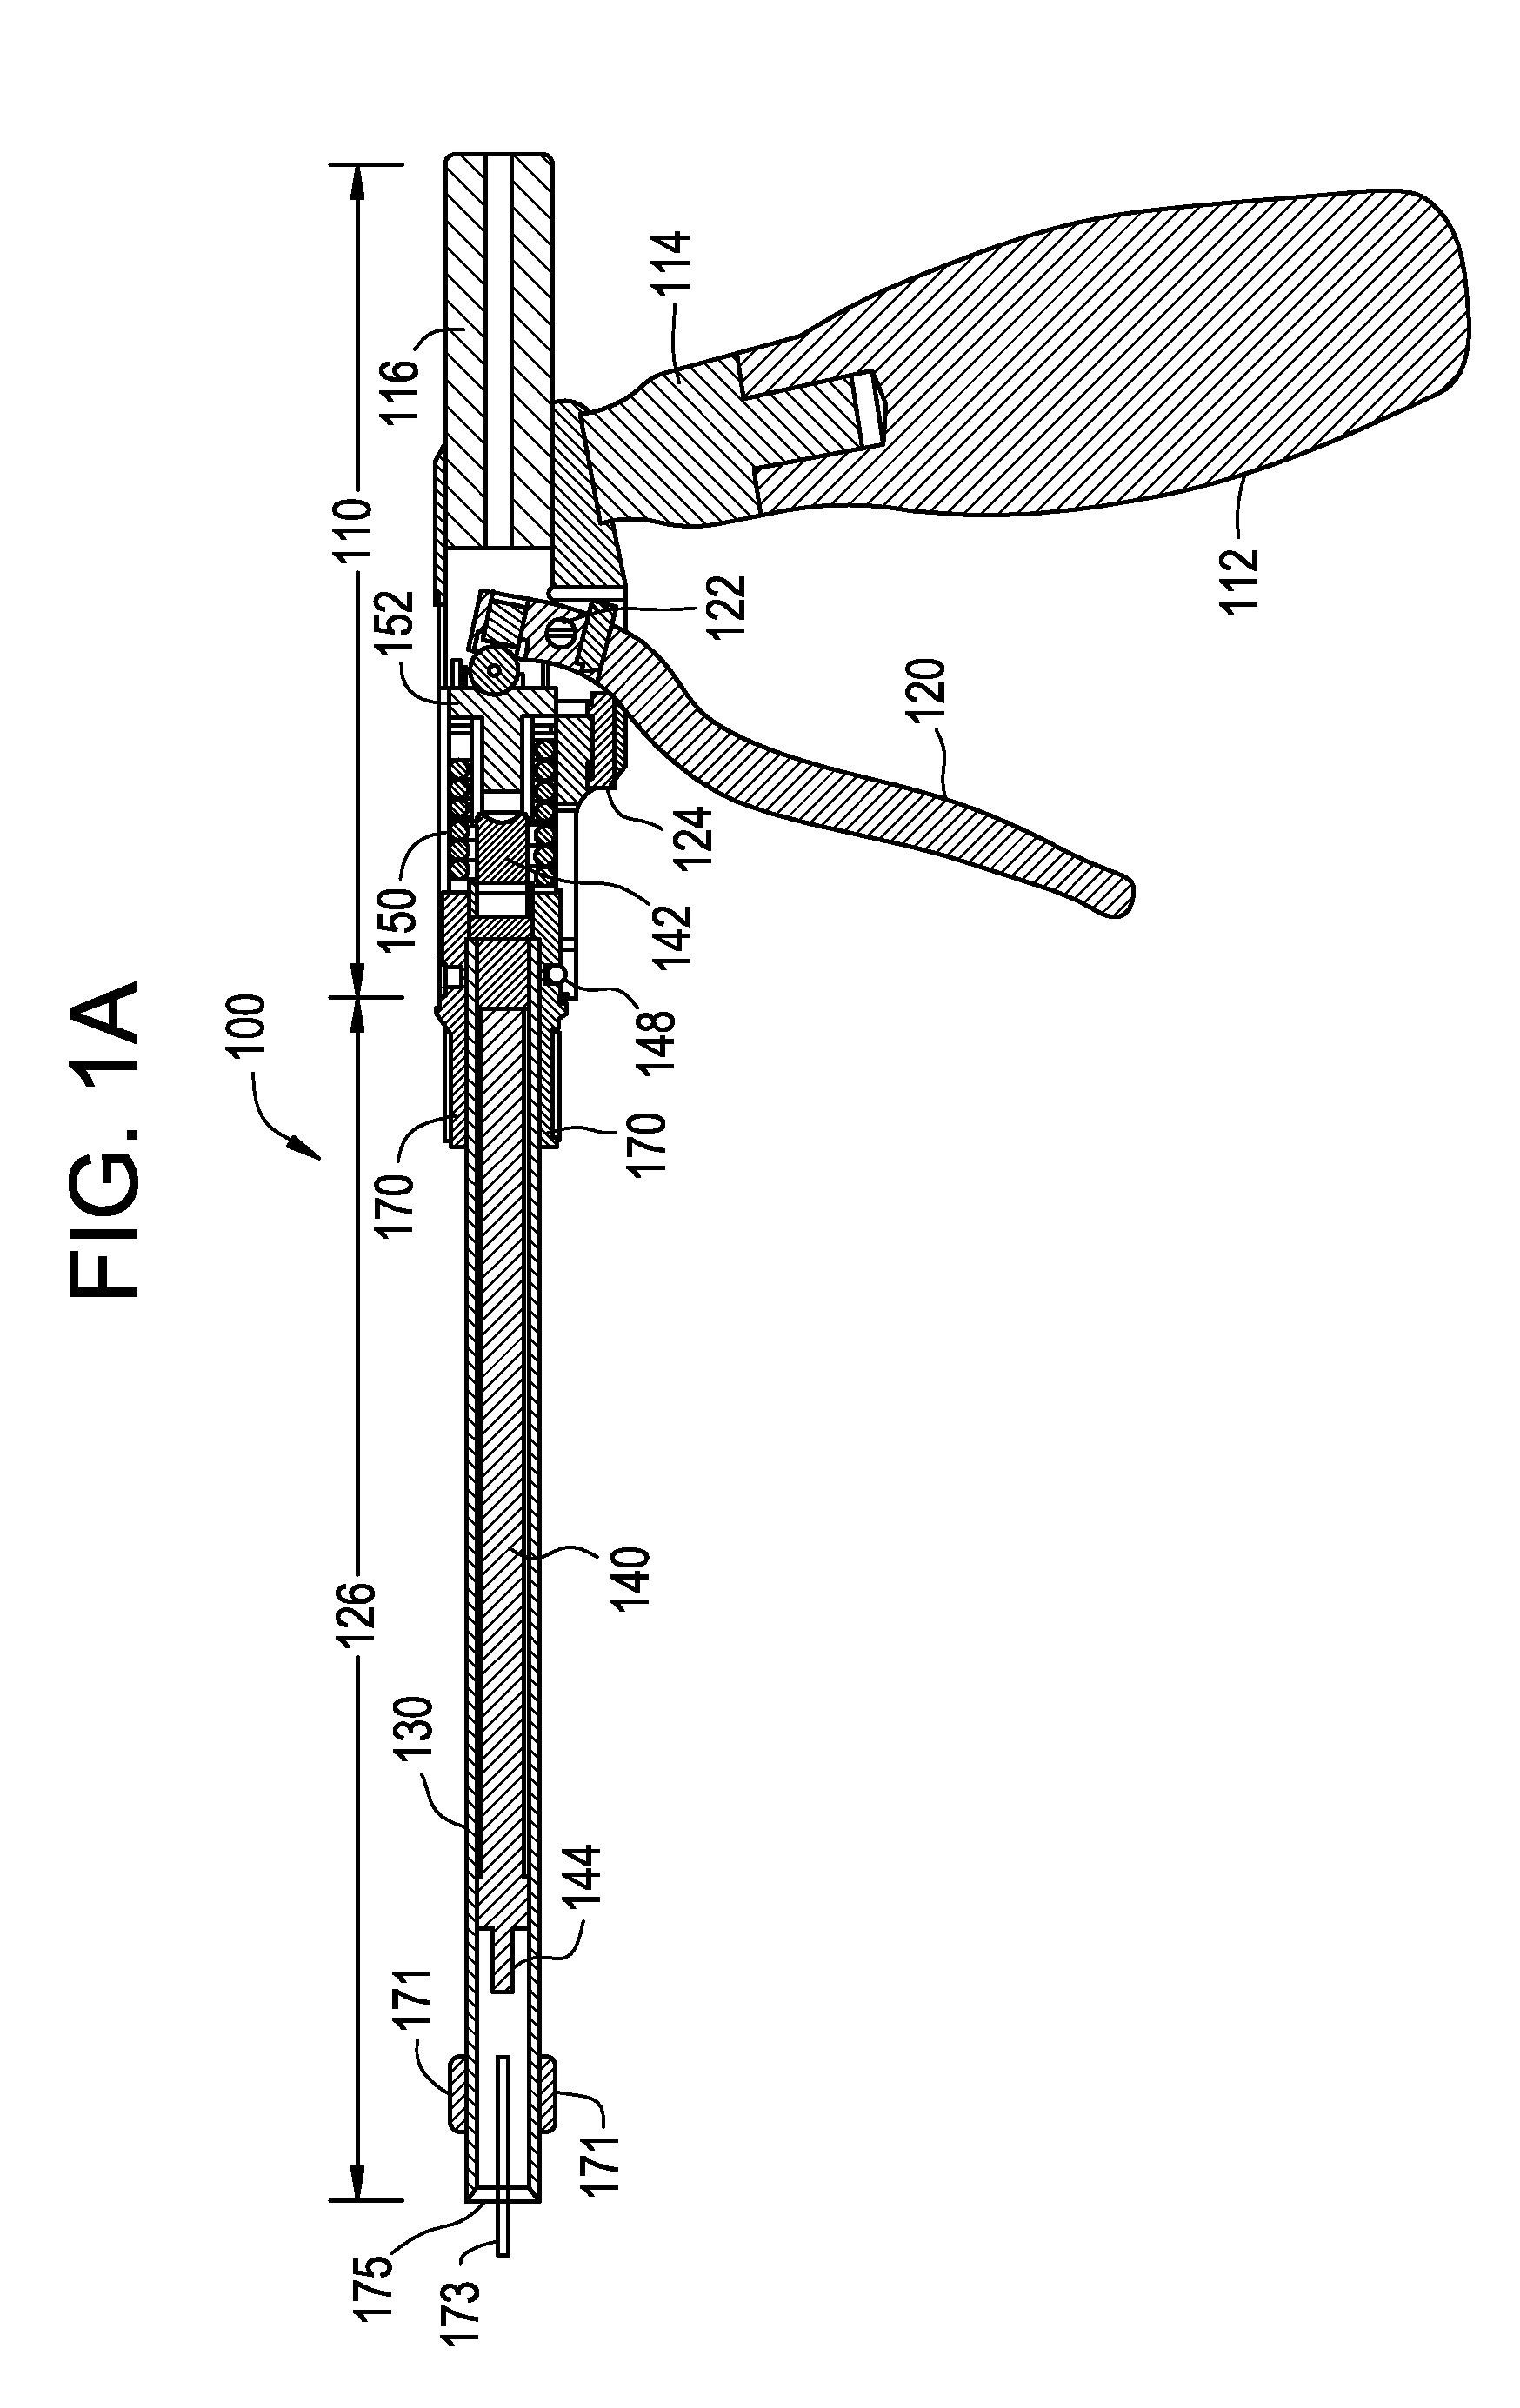 Novel implant inserter having a laterally-extending dovetail engagement feature